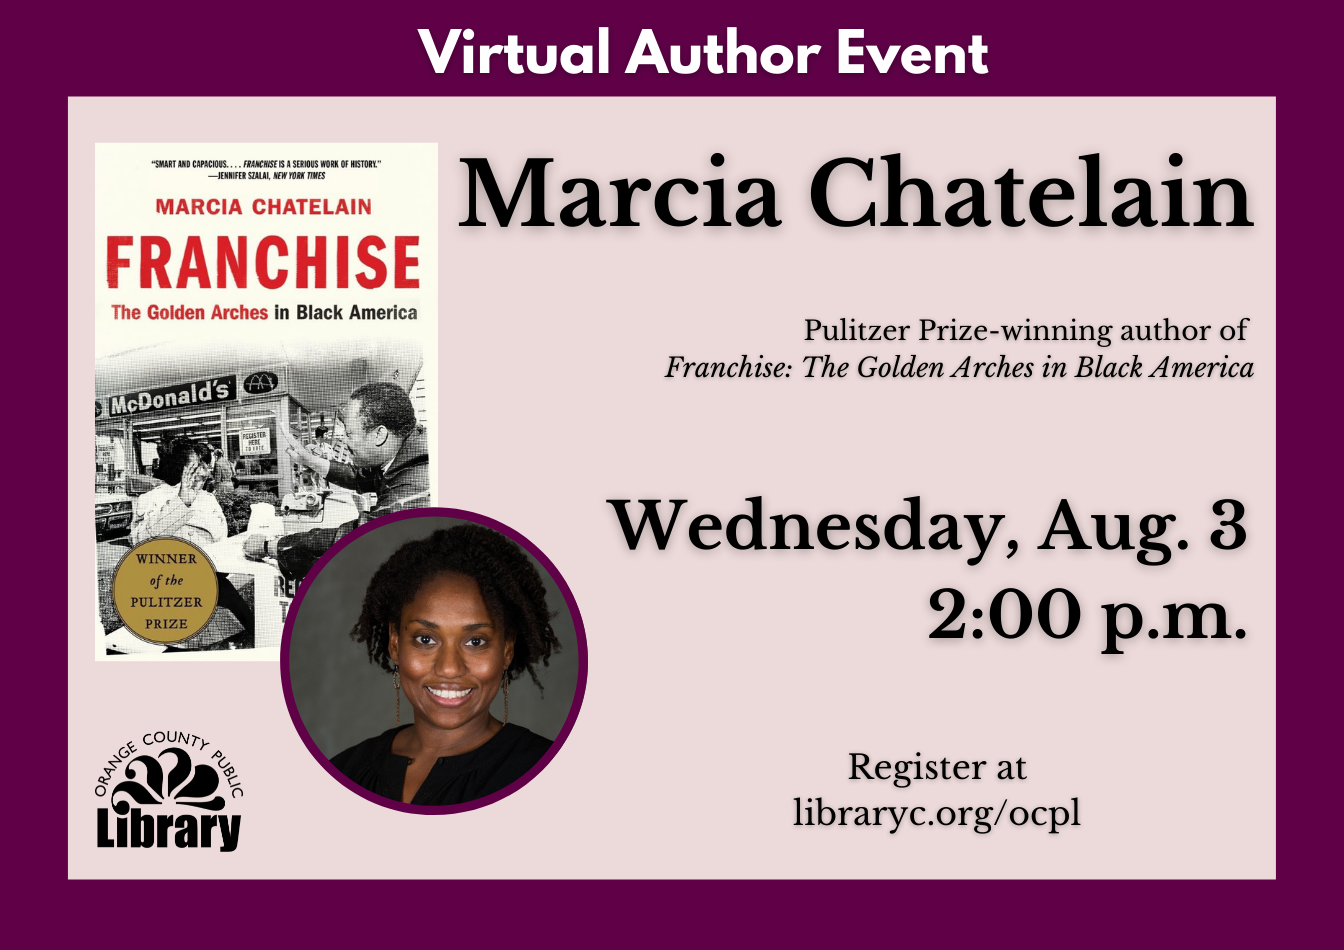 A widget advertising a virtual author event with Marcia Chatelain.